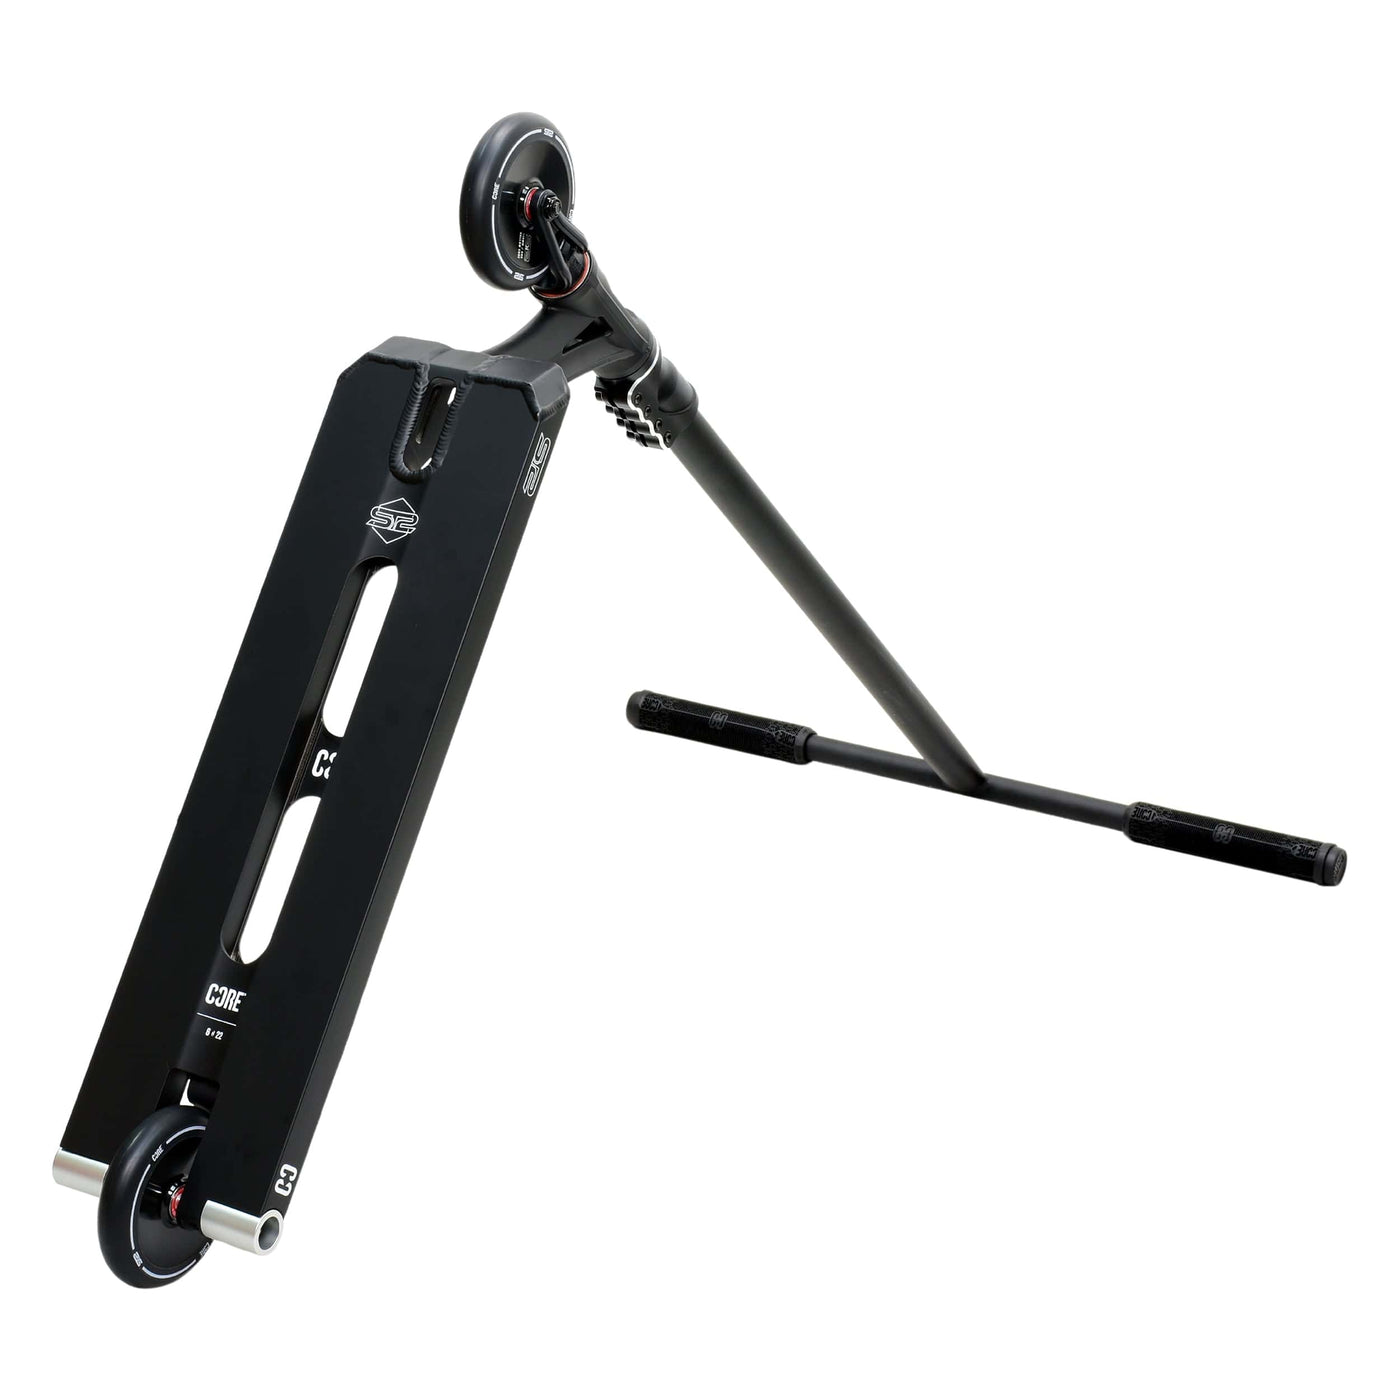 CORE ST2 Stunt Scooter Black I Adult Stunt Scooter Leaning Side